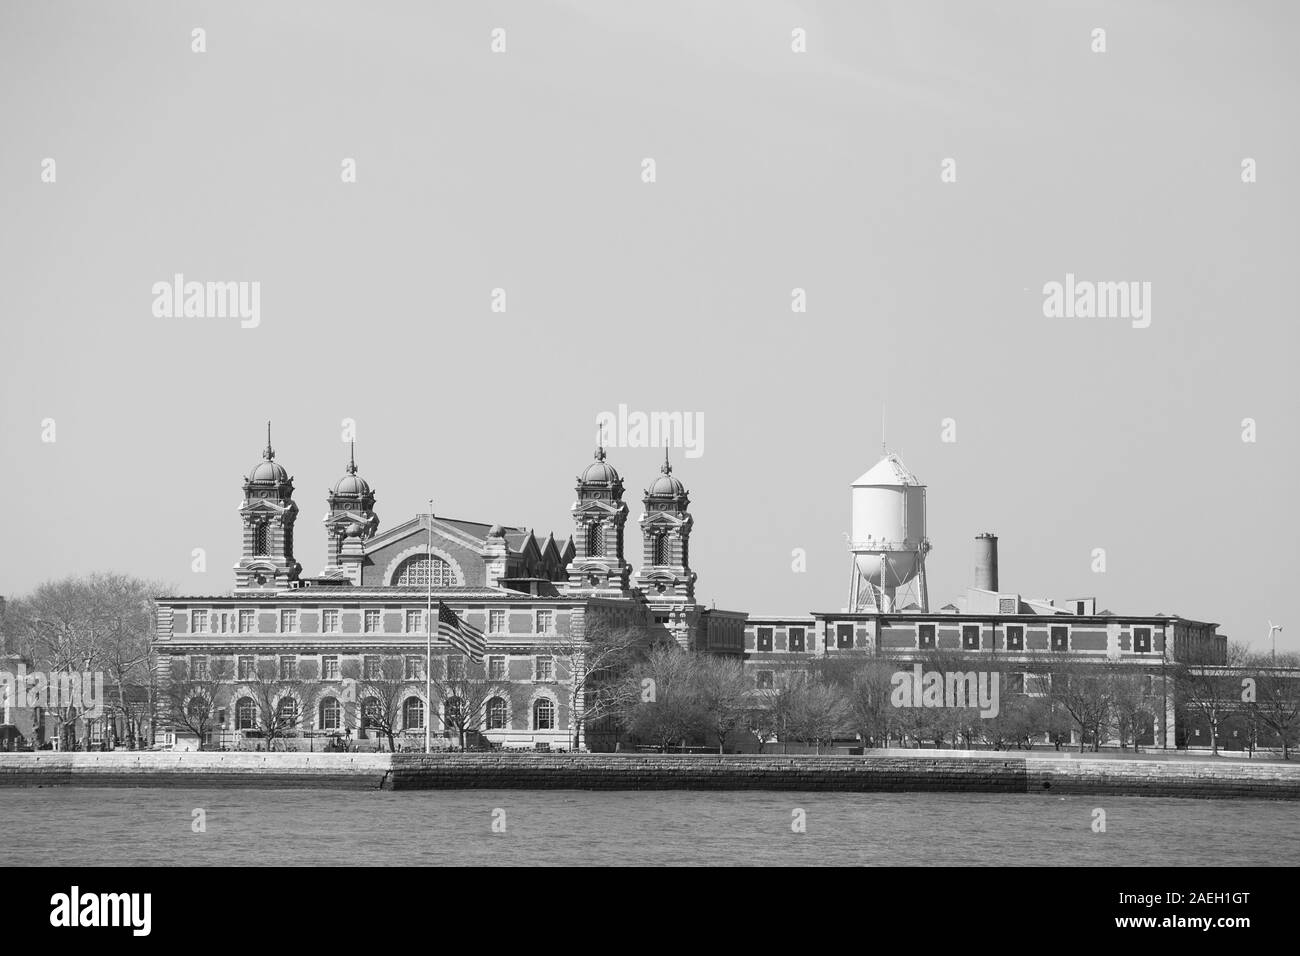 Ellis island national museum of immigration Black and White Stock ...